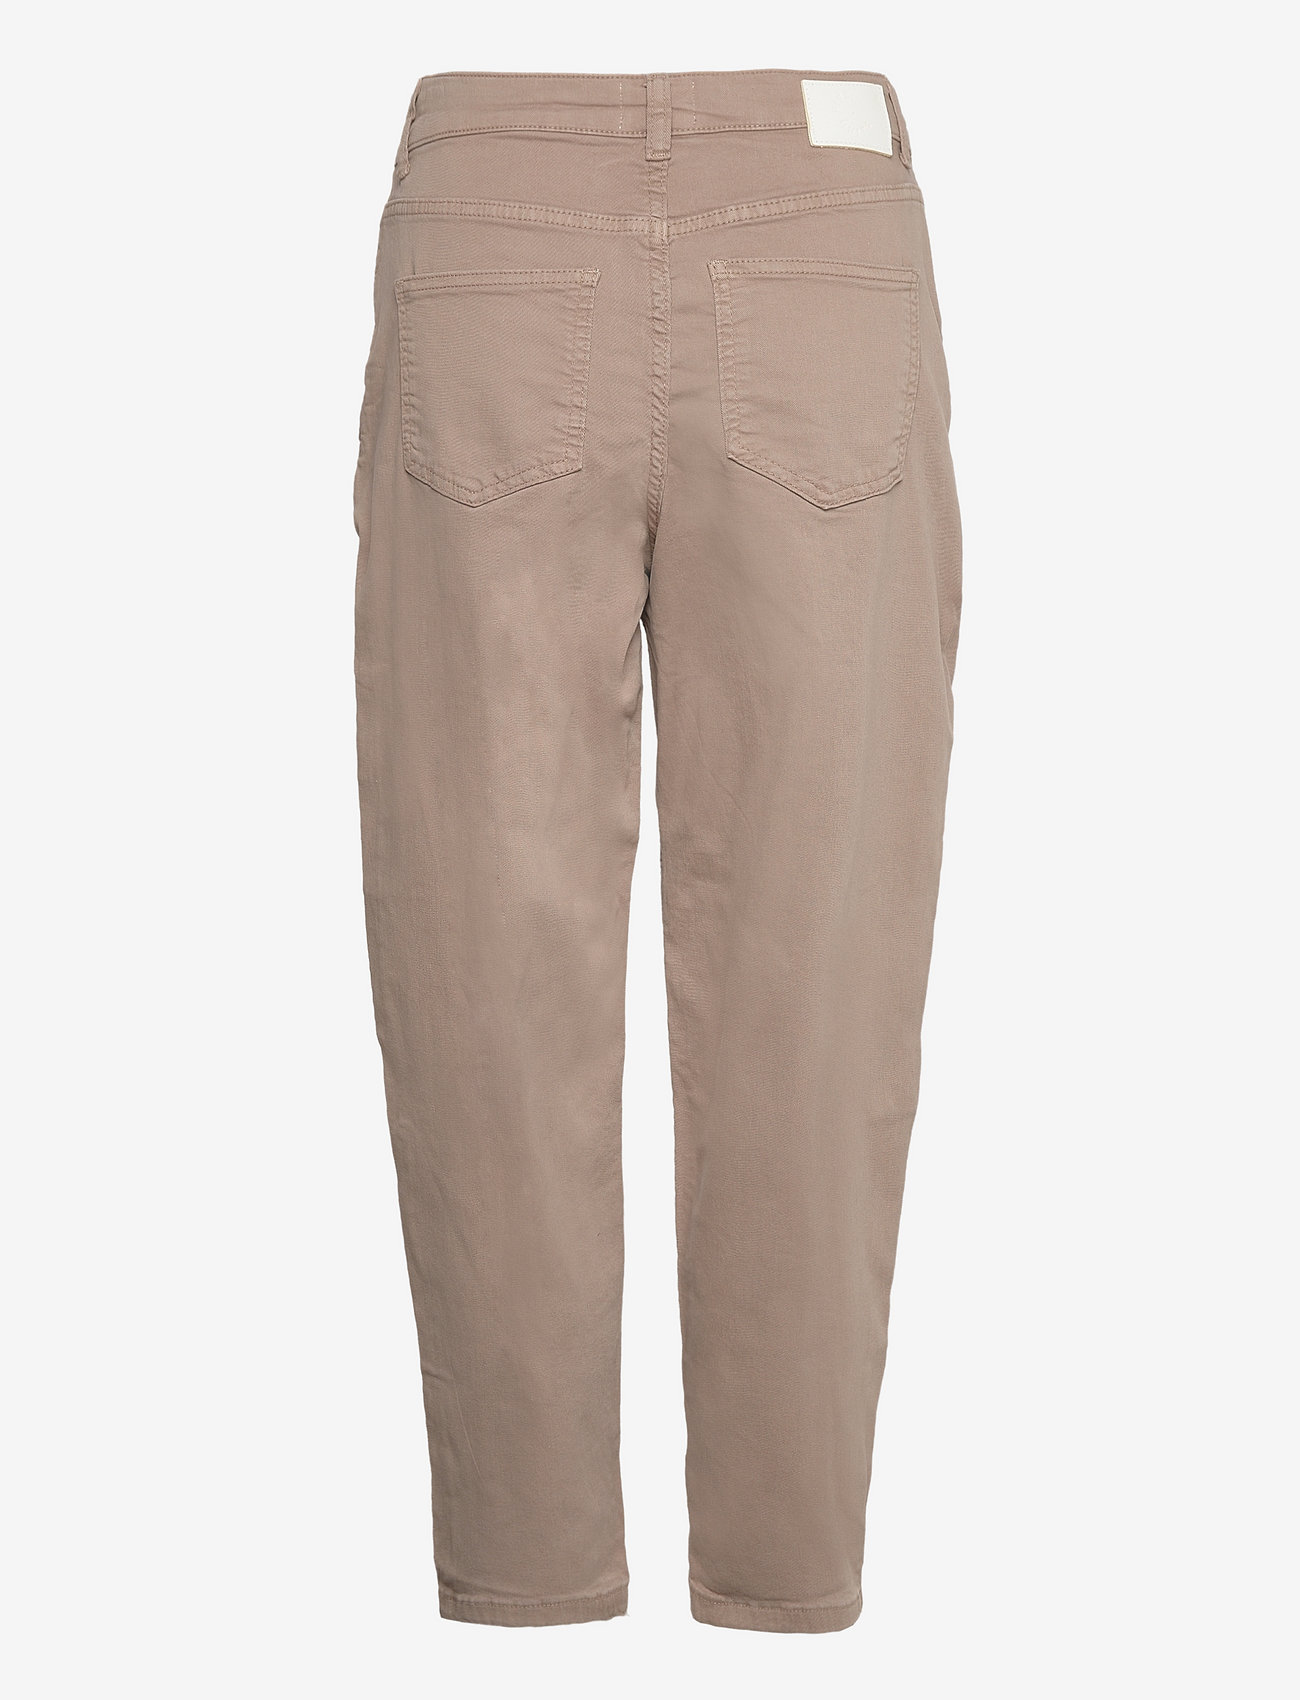 FIVEUNITS - Alba 741 - tapered jeans - grey clay - 1